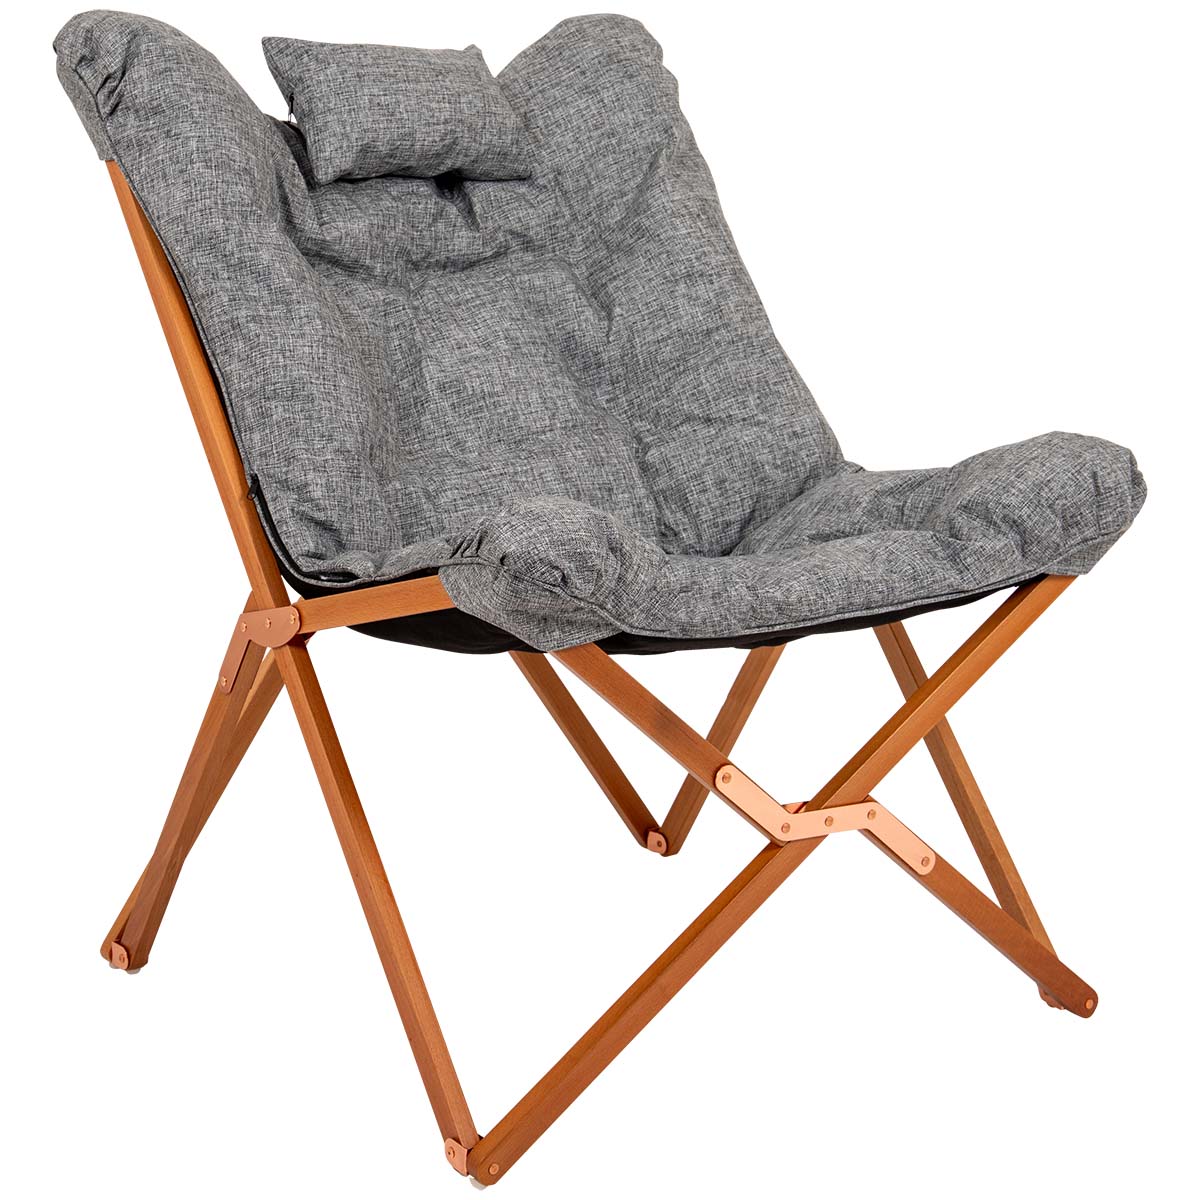 1200396 An eco-friendly and highly comfortable relax chair from the Urban Outdoor collection. This chair features a stylish and sturdy wooden frame with an FSC certification. The thickly padded seat is made from recycled Oxford polyester and has a linen-like appearance. The thick padding on the seat adds extra comfort. The recycled fabric and wooden frame make the lounge chair environmentally friendly. The combination of a wide and deep seat, padded fabric, and headrest makes this chair very comfortable. The frame is foldable, making it easy to take with you. However, it can also be used in the living room, on the balcony, or in the garden.